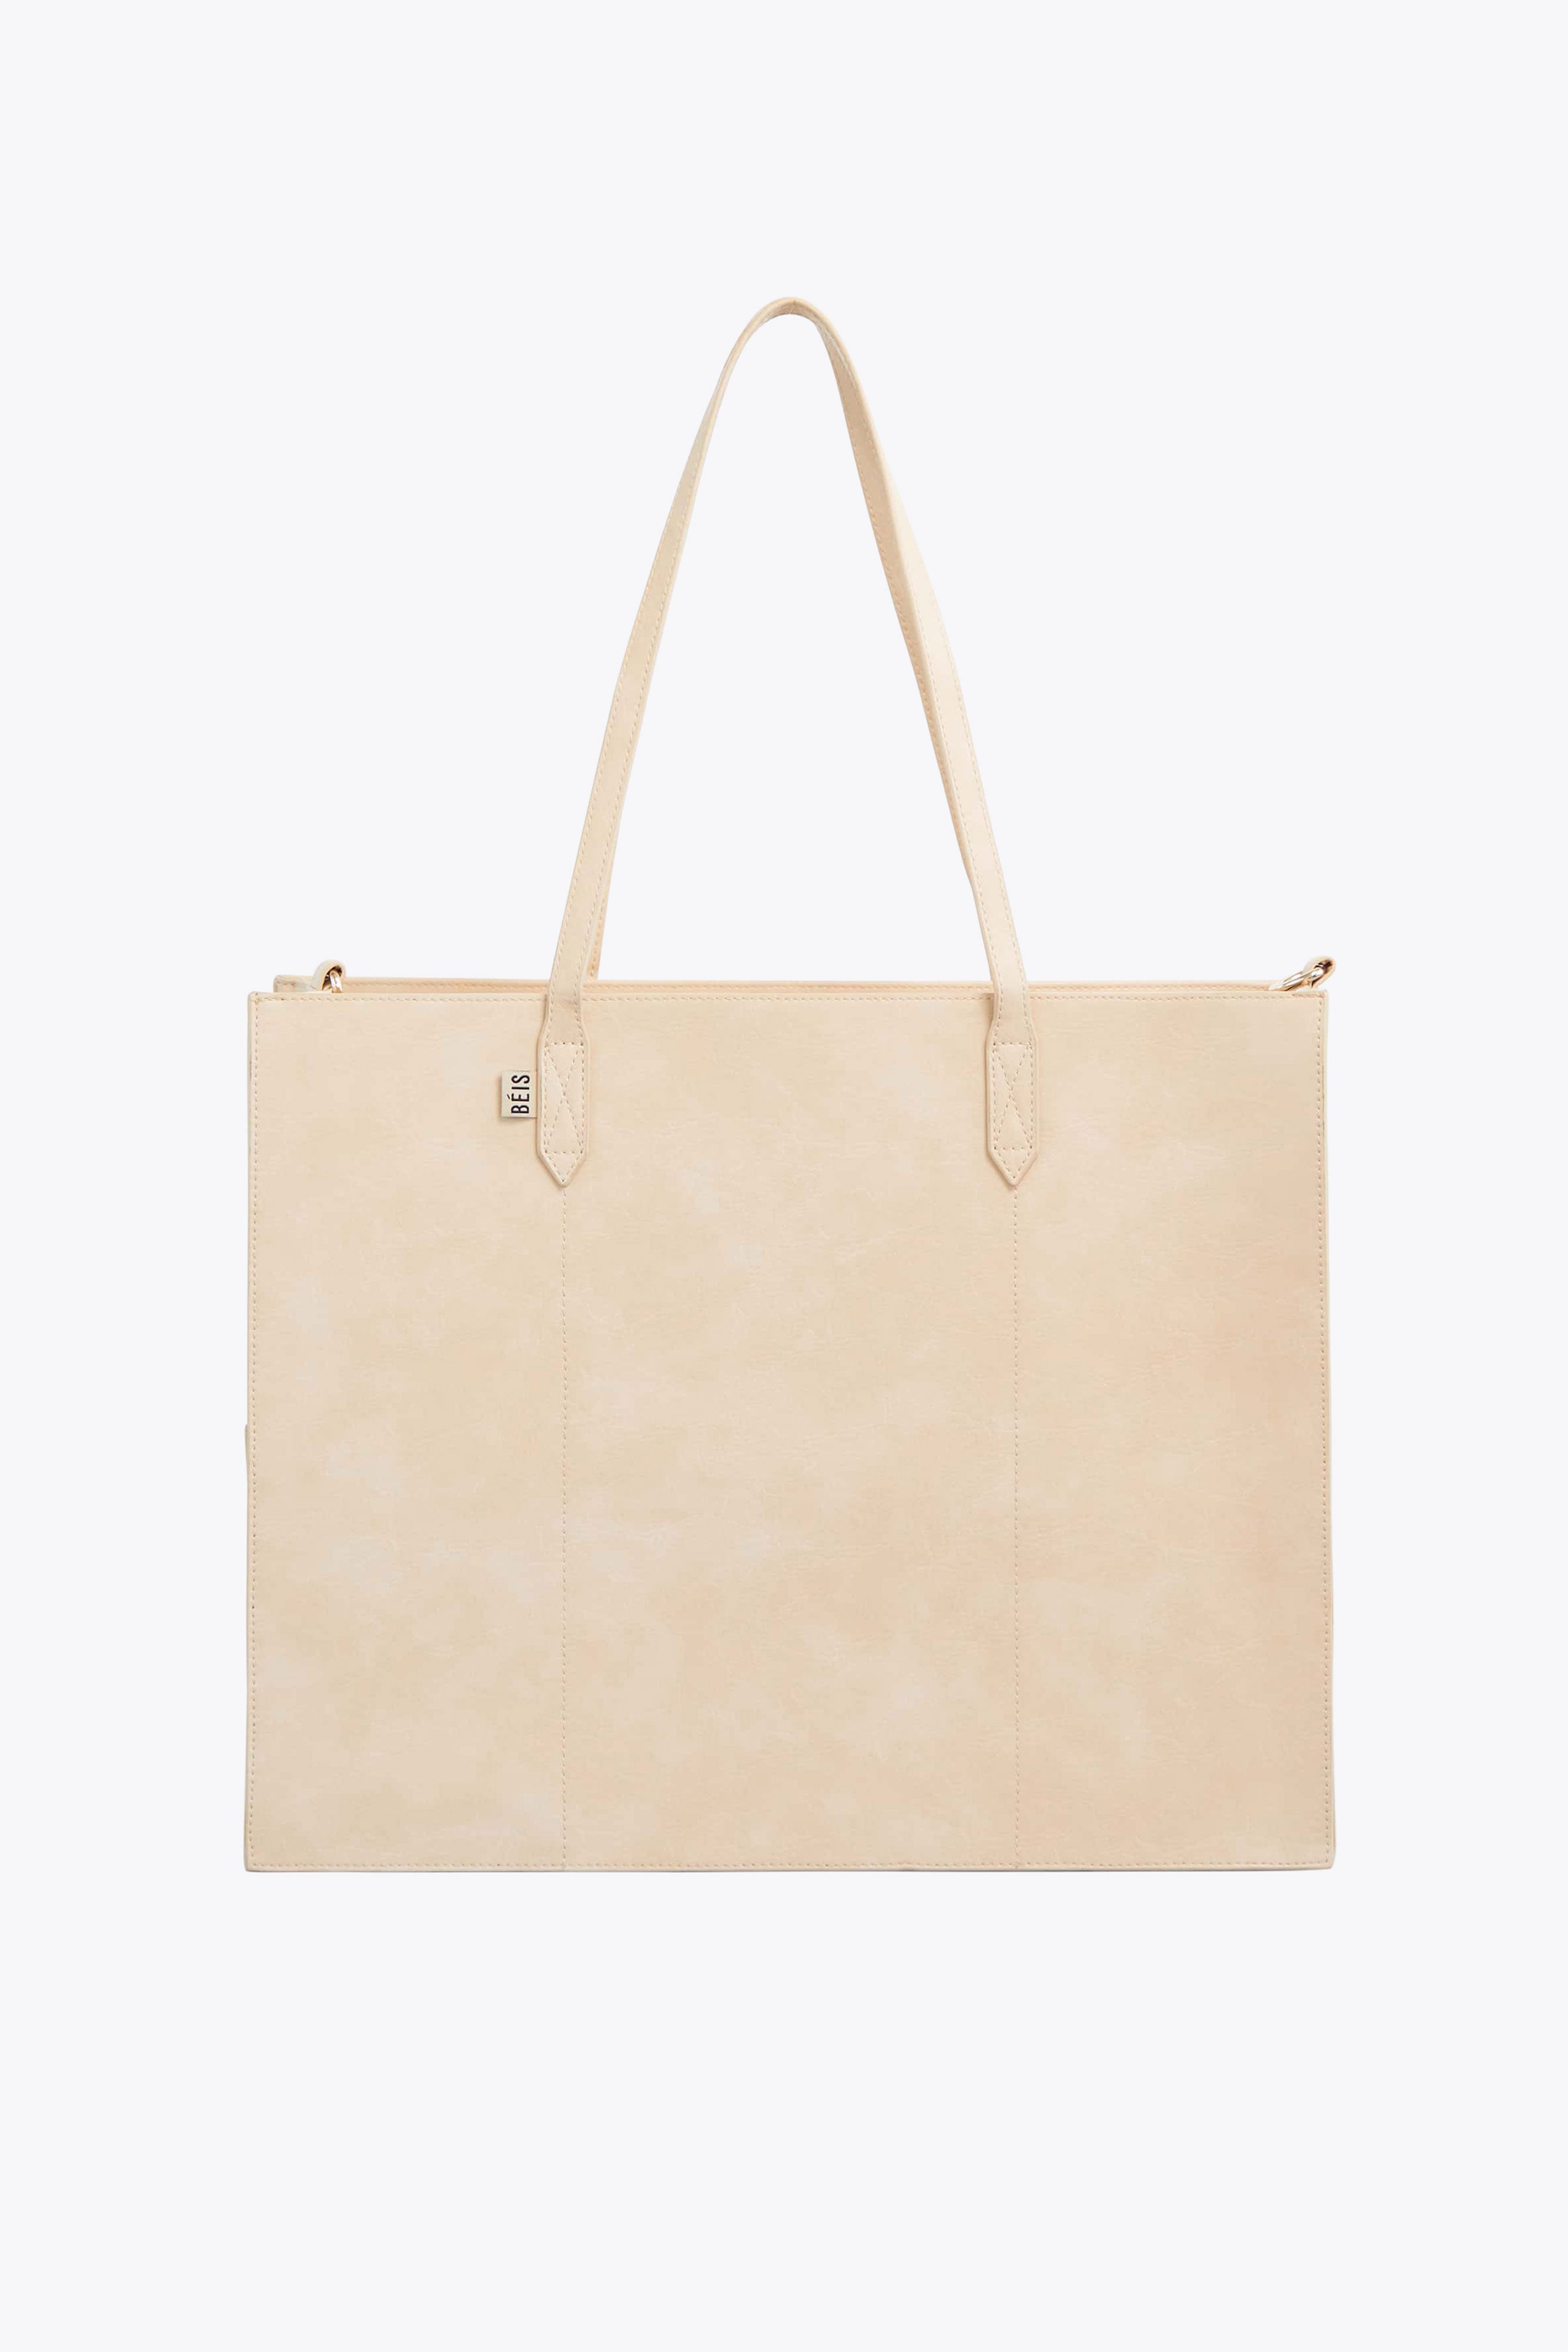 Large Capacity Tote Bag S706 (beige) : Clothing  